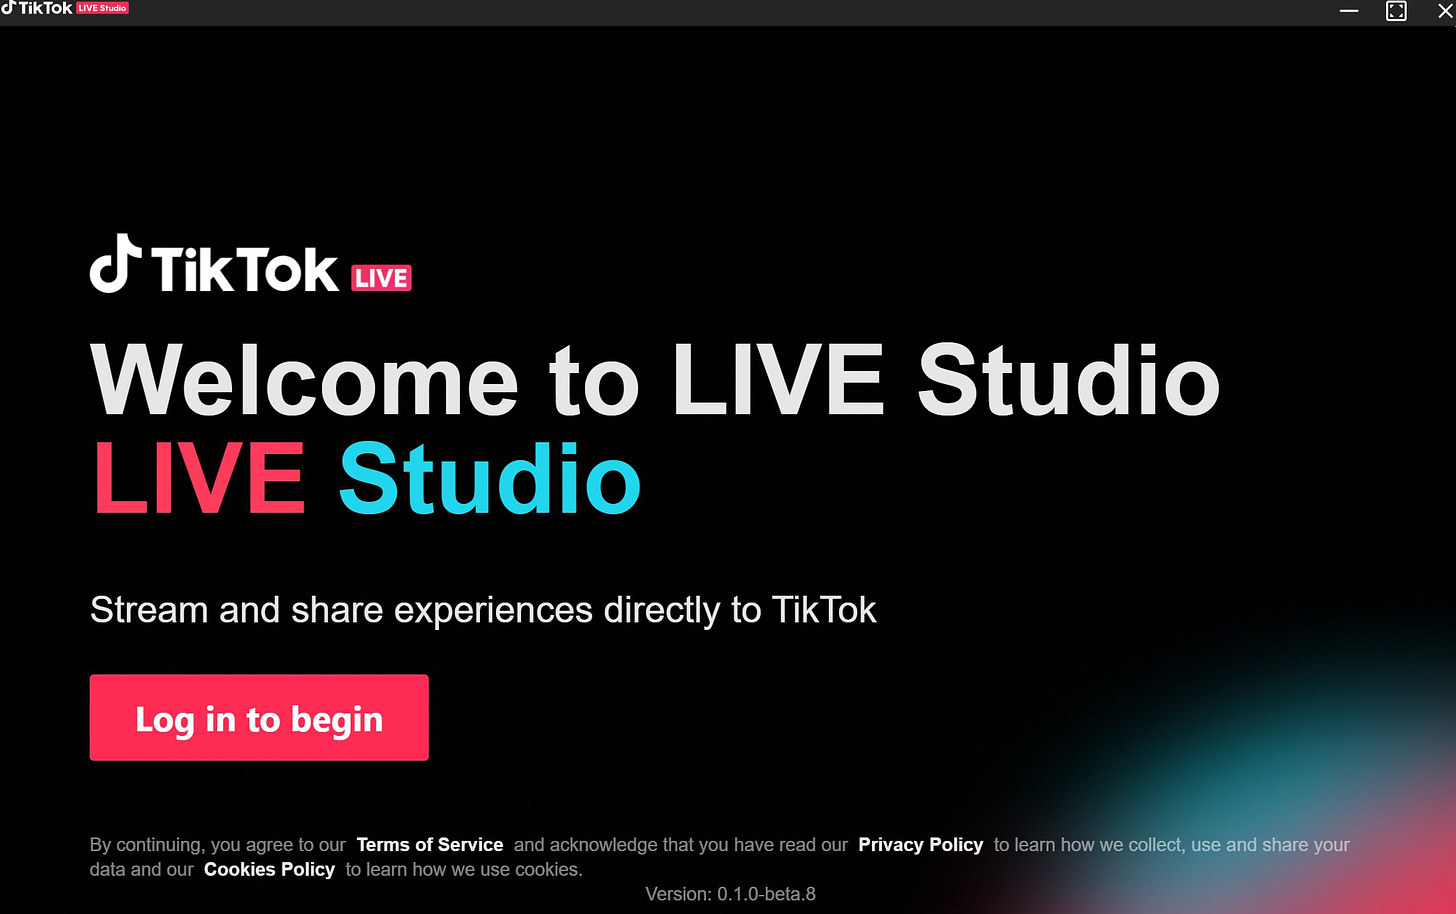 Ditch Twitch? Download TikTok LIVE Studio to test out the new desktop  streaming software for Windows | BetaNews